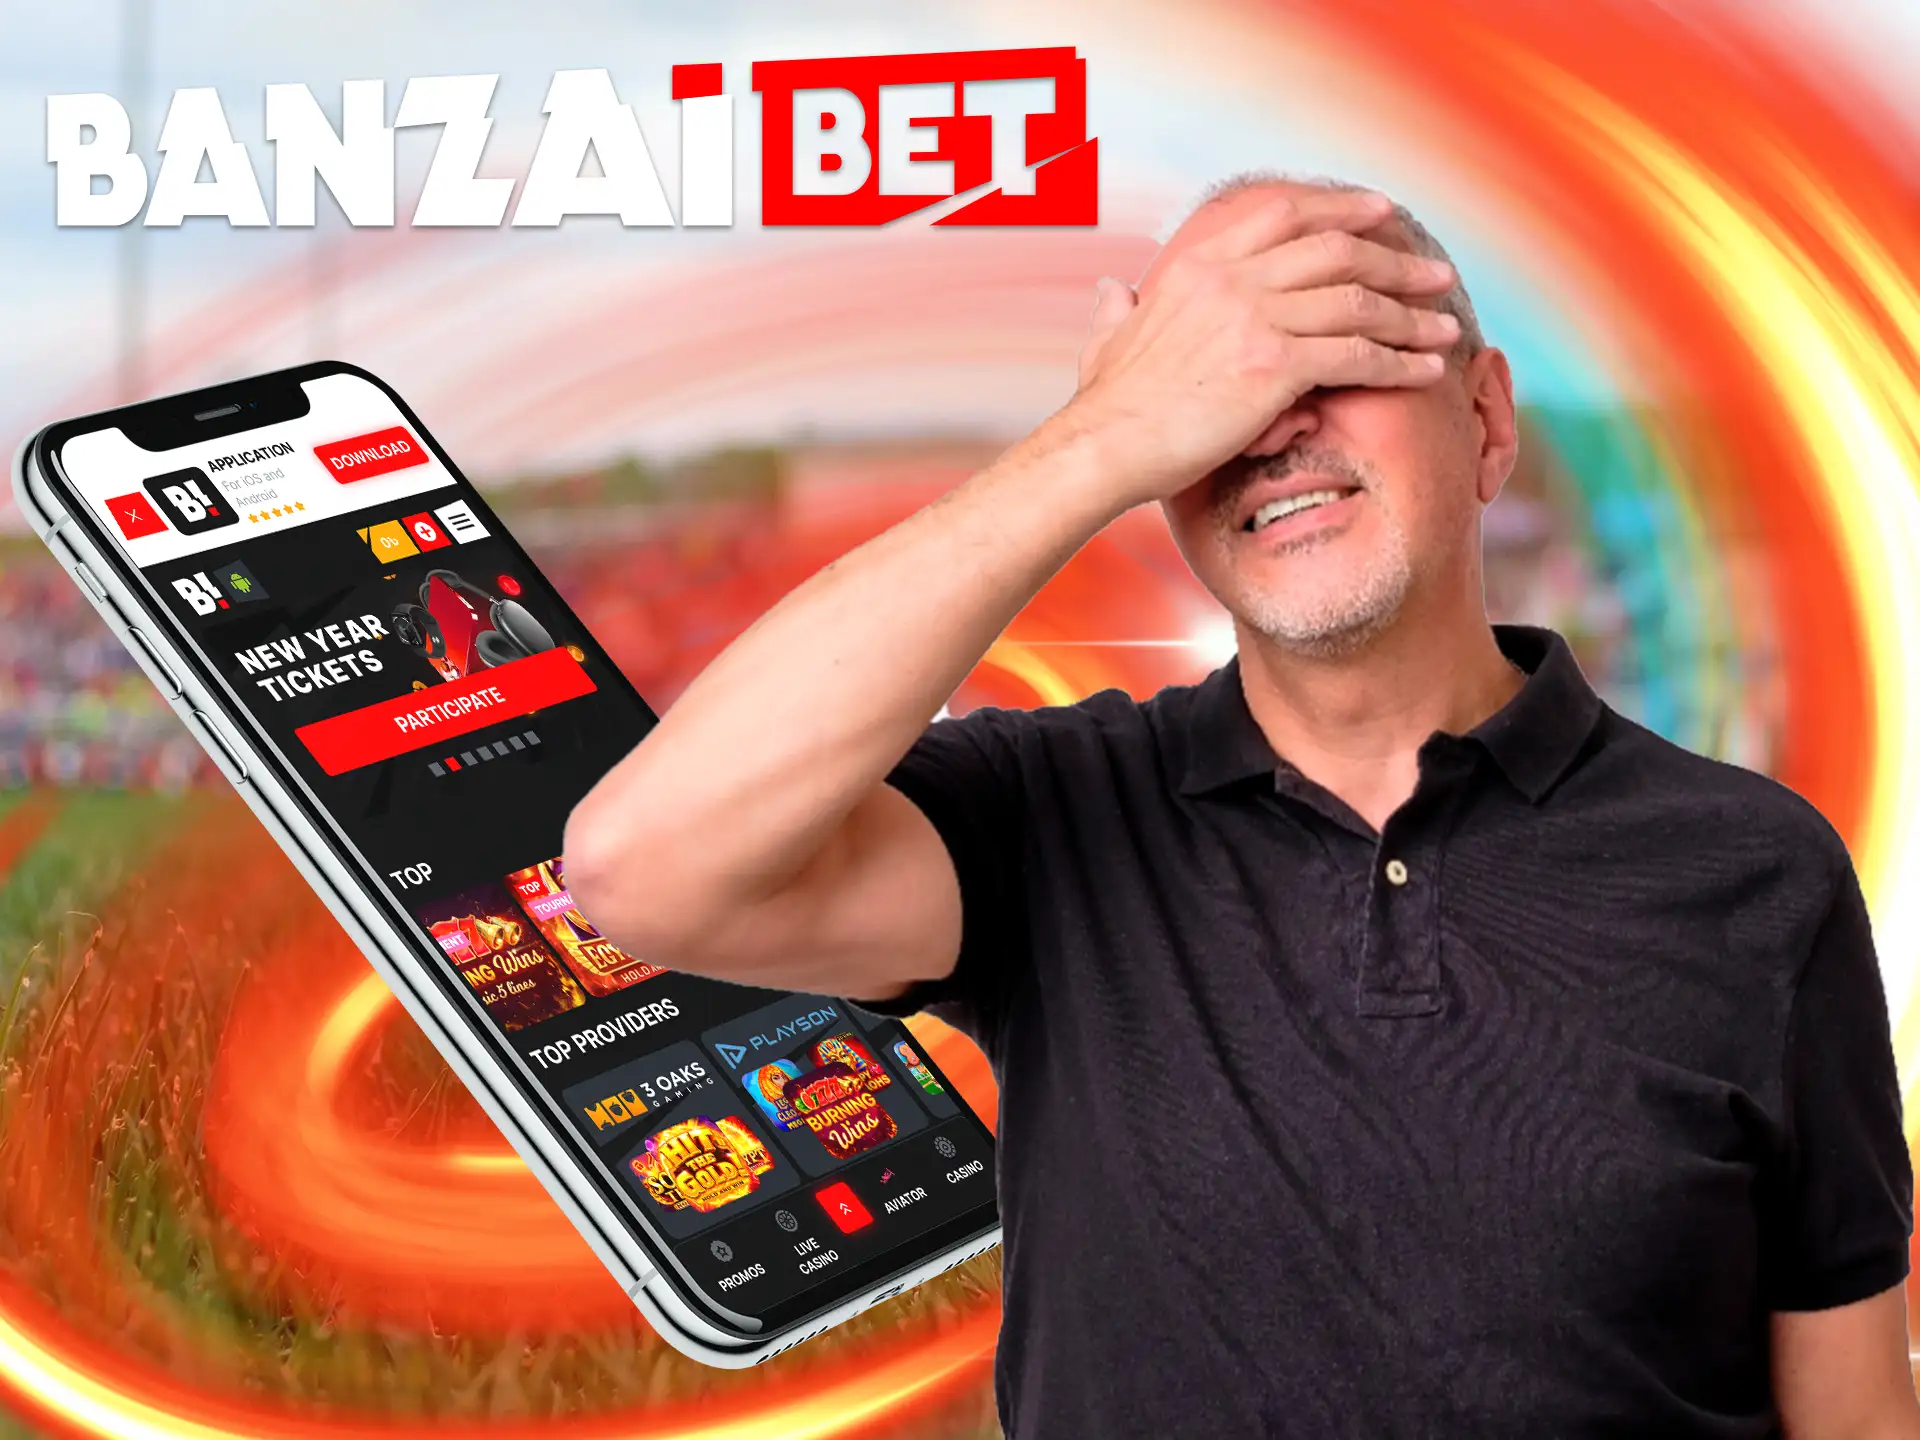 To prevent uncontrolled spending of money on the Banzai Bet platform, players must control themselves.